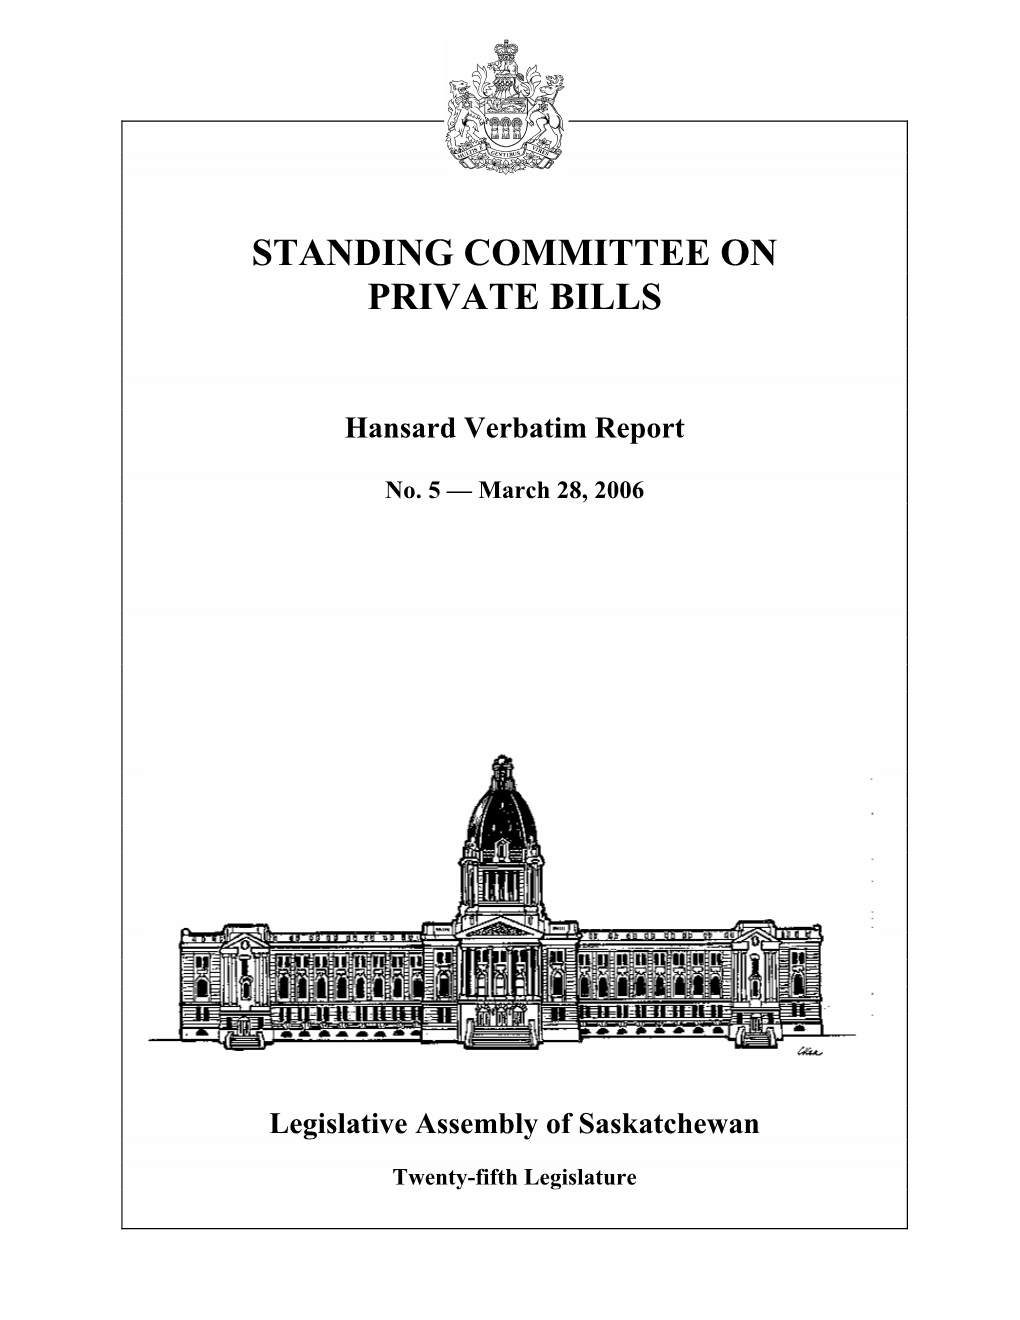 March 28, 2006 Private Bills Committee